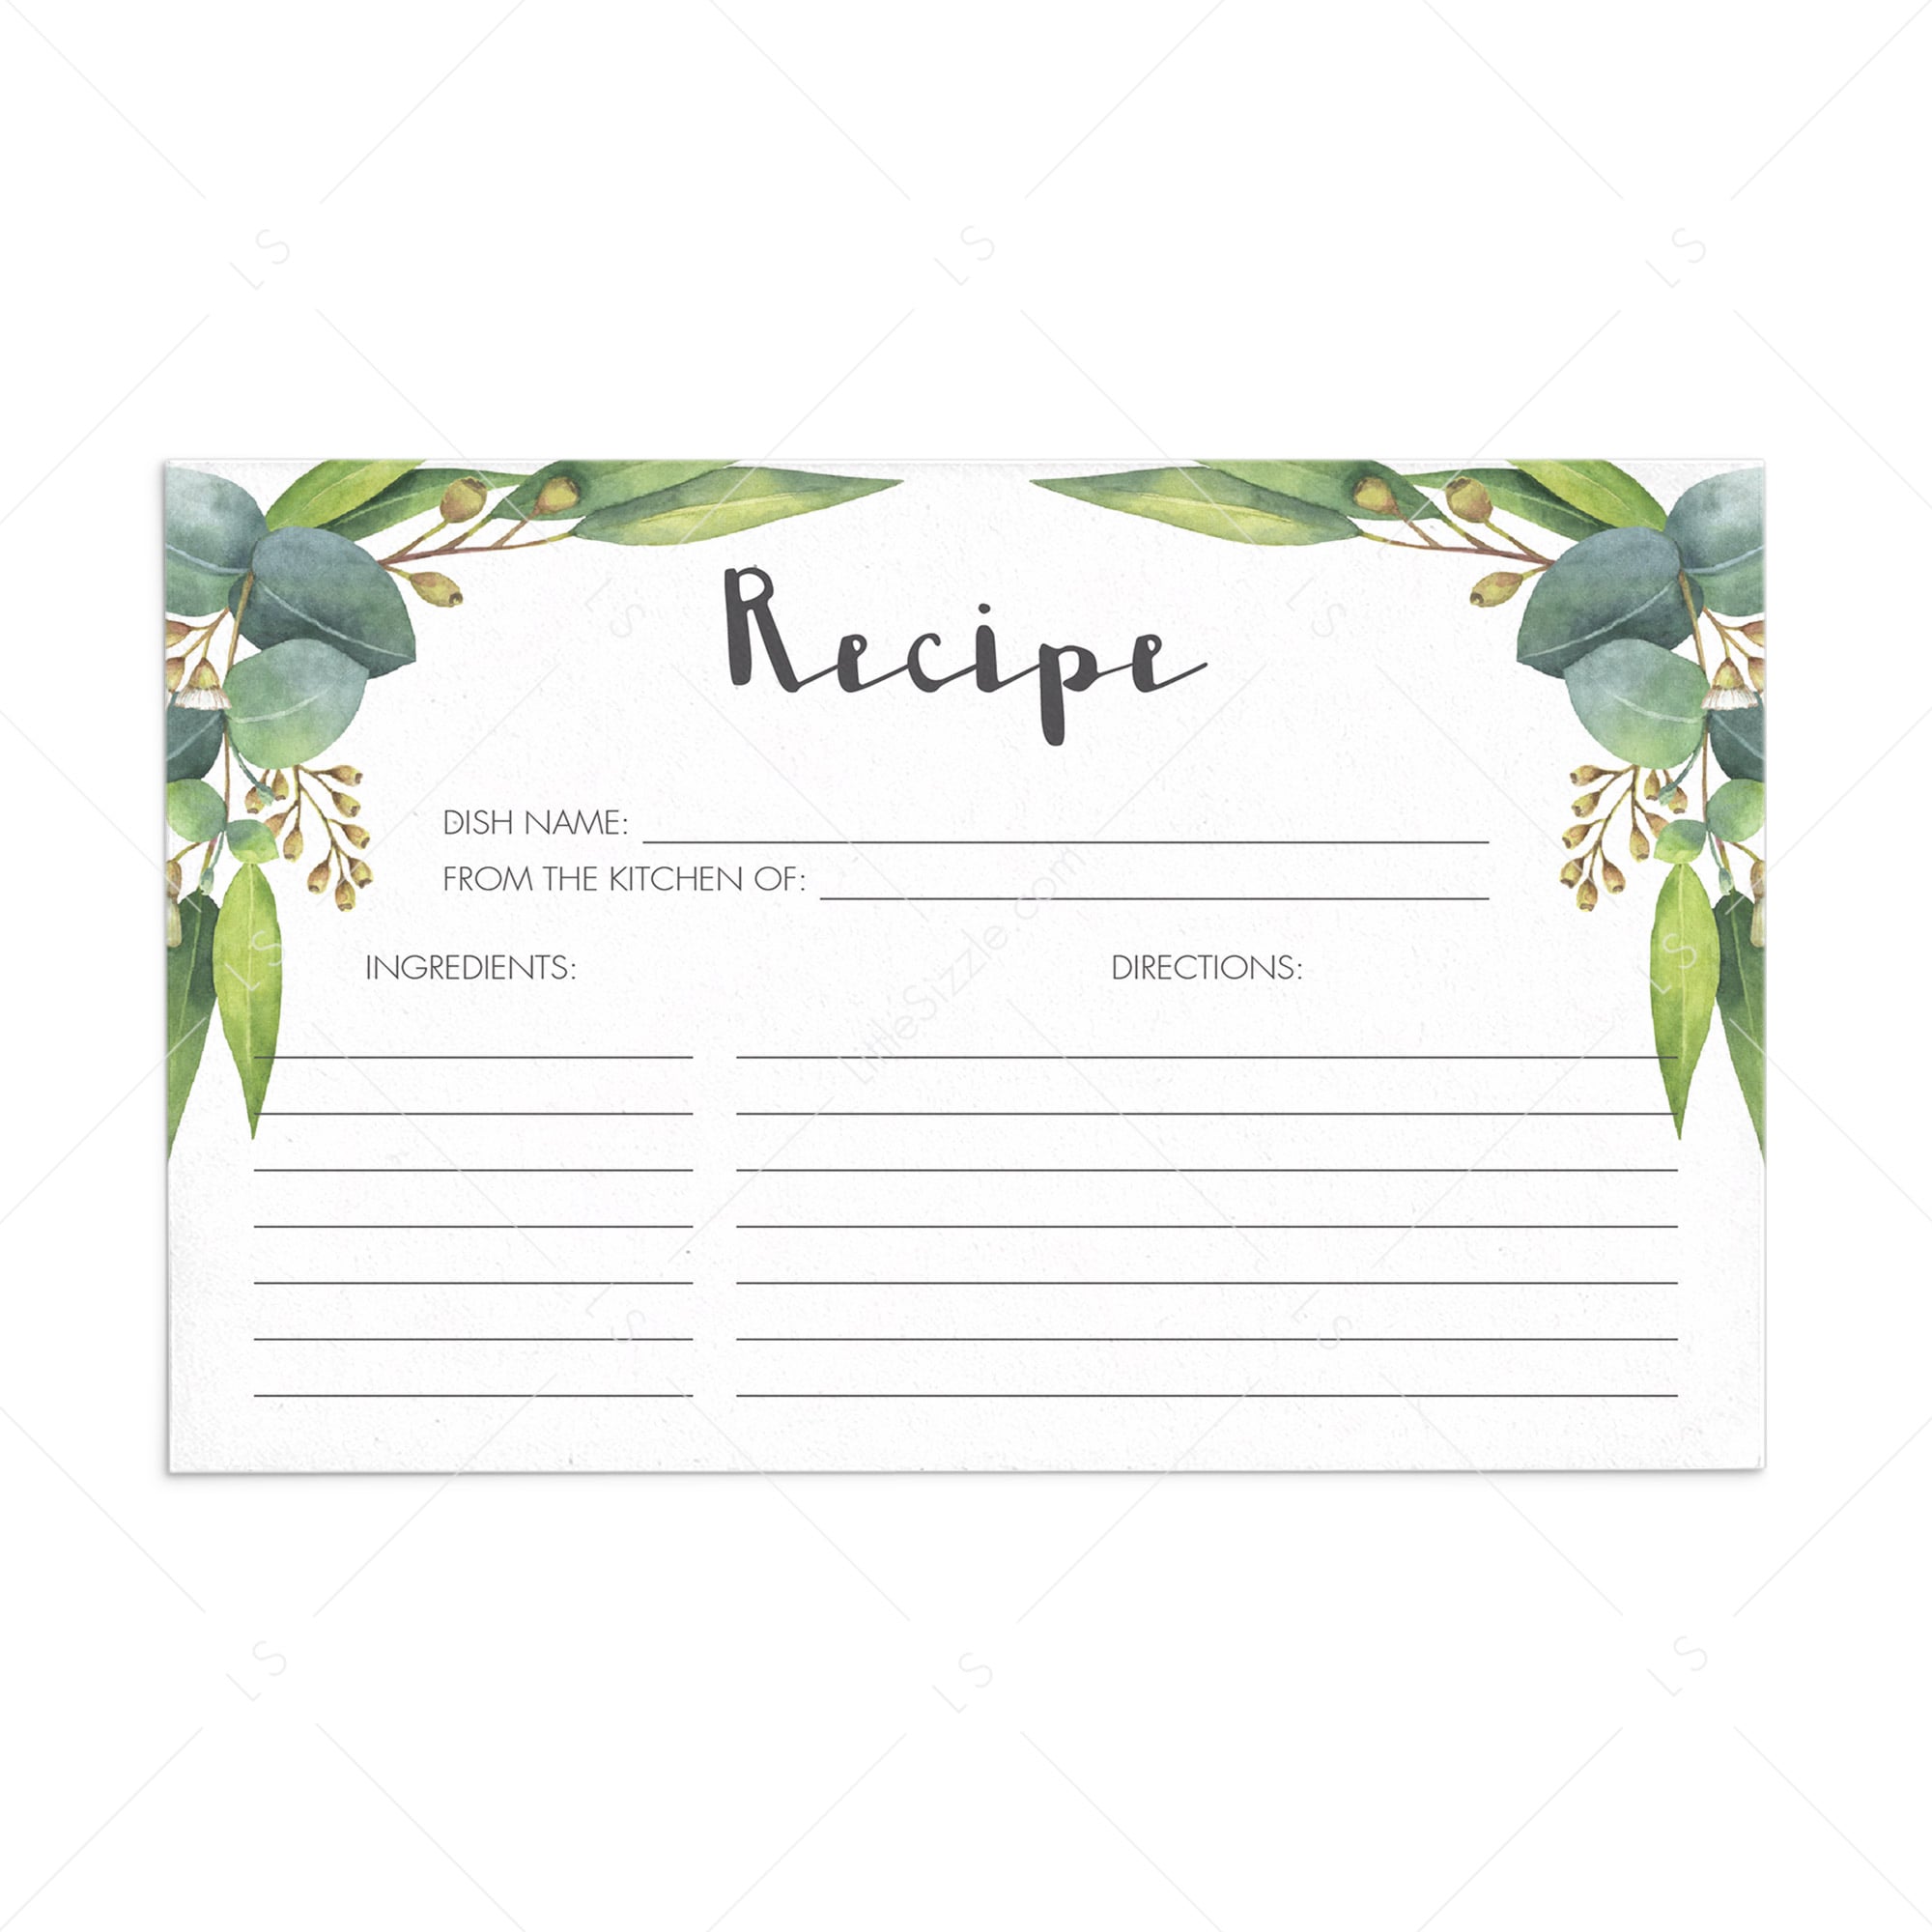 Printable recipe cards instant download PDF by LittleSizzle